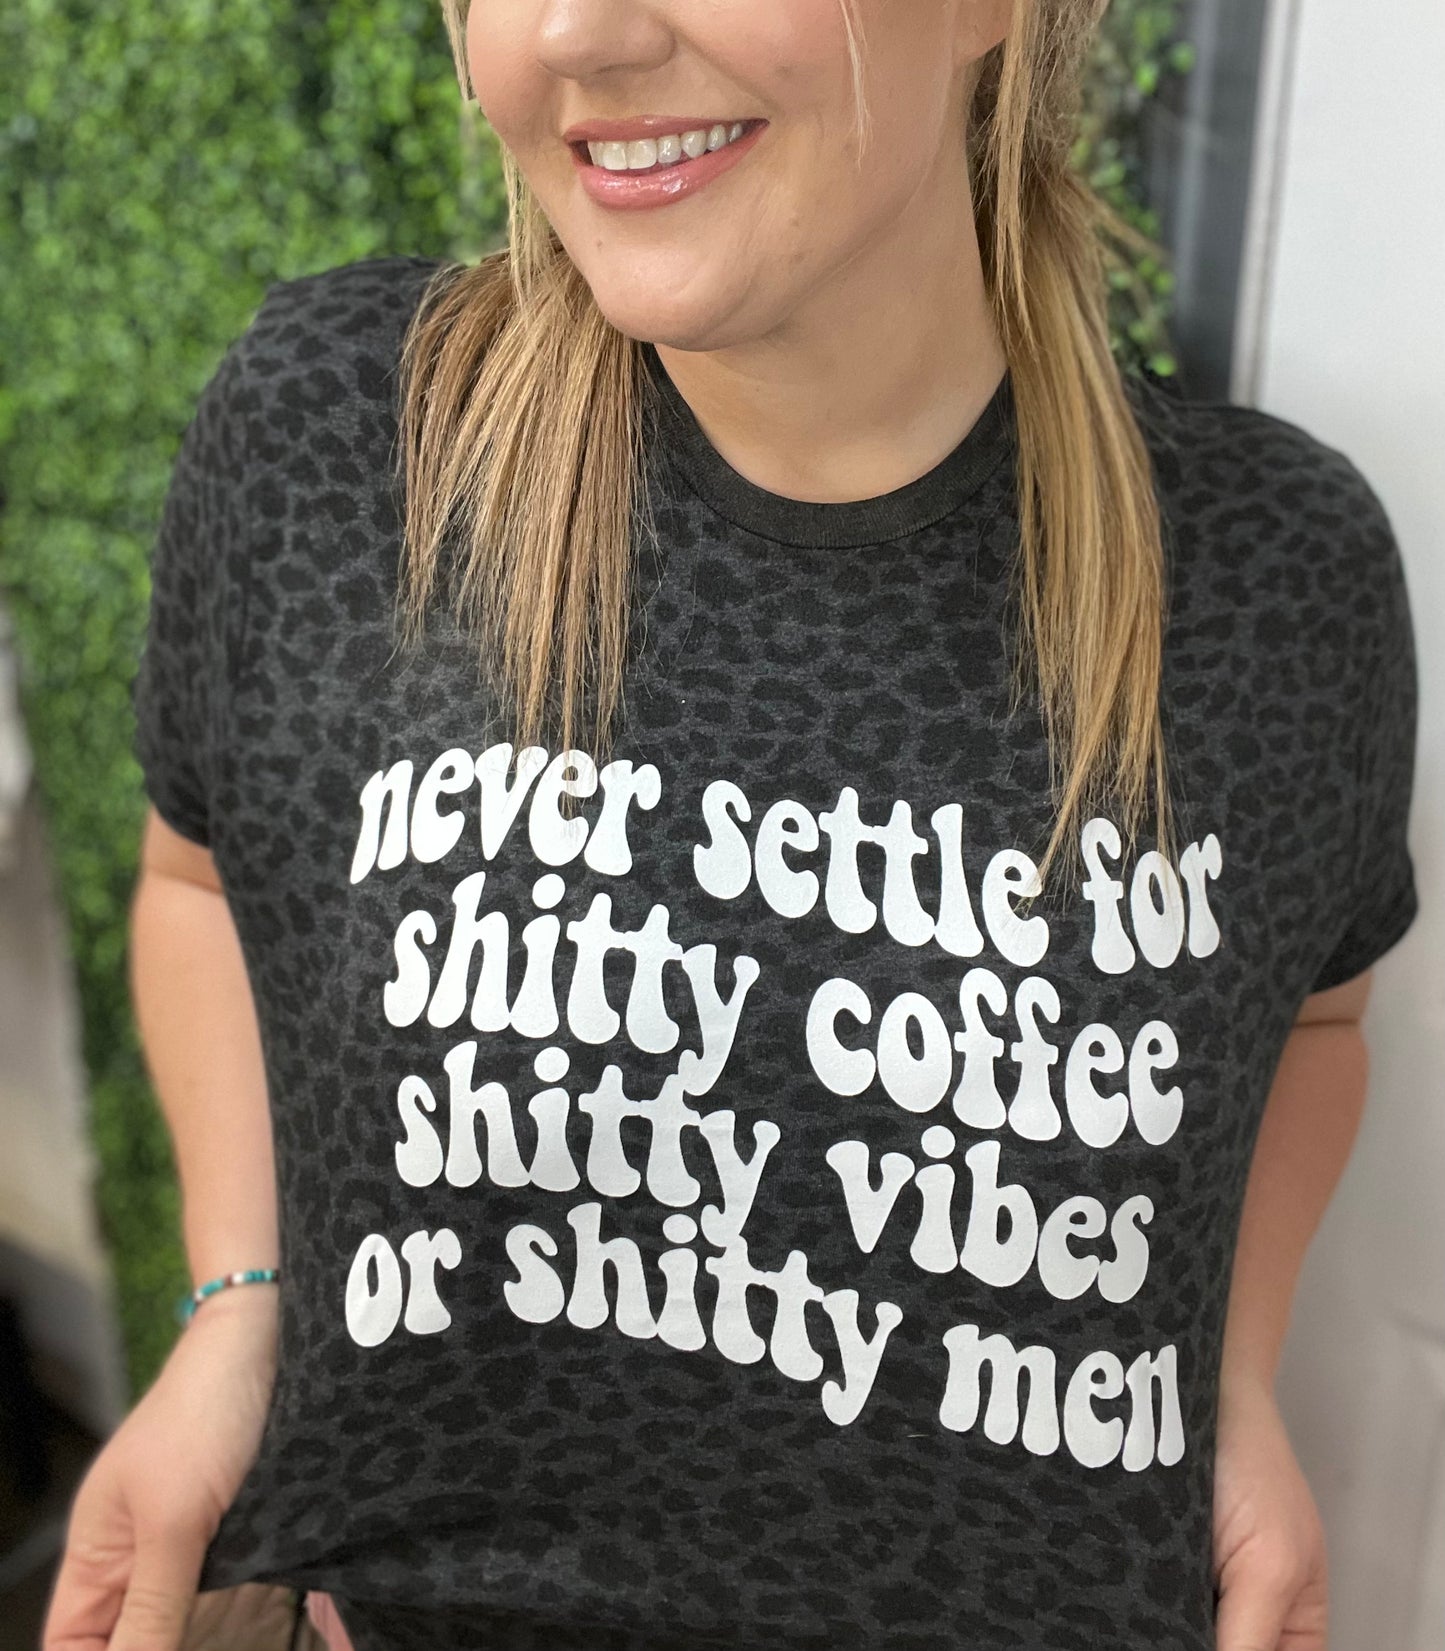 Never settle for shitty coffee, shitty vibes, or shitty men